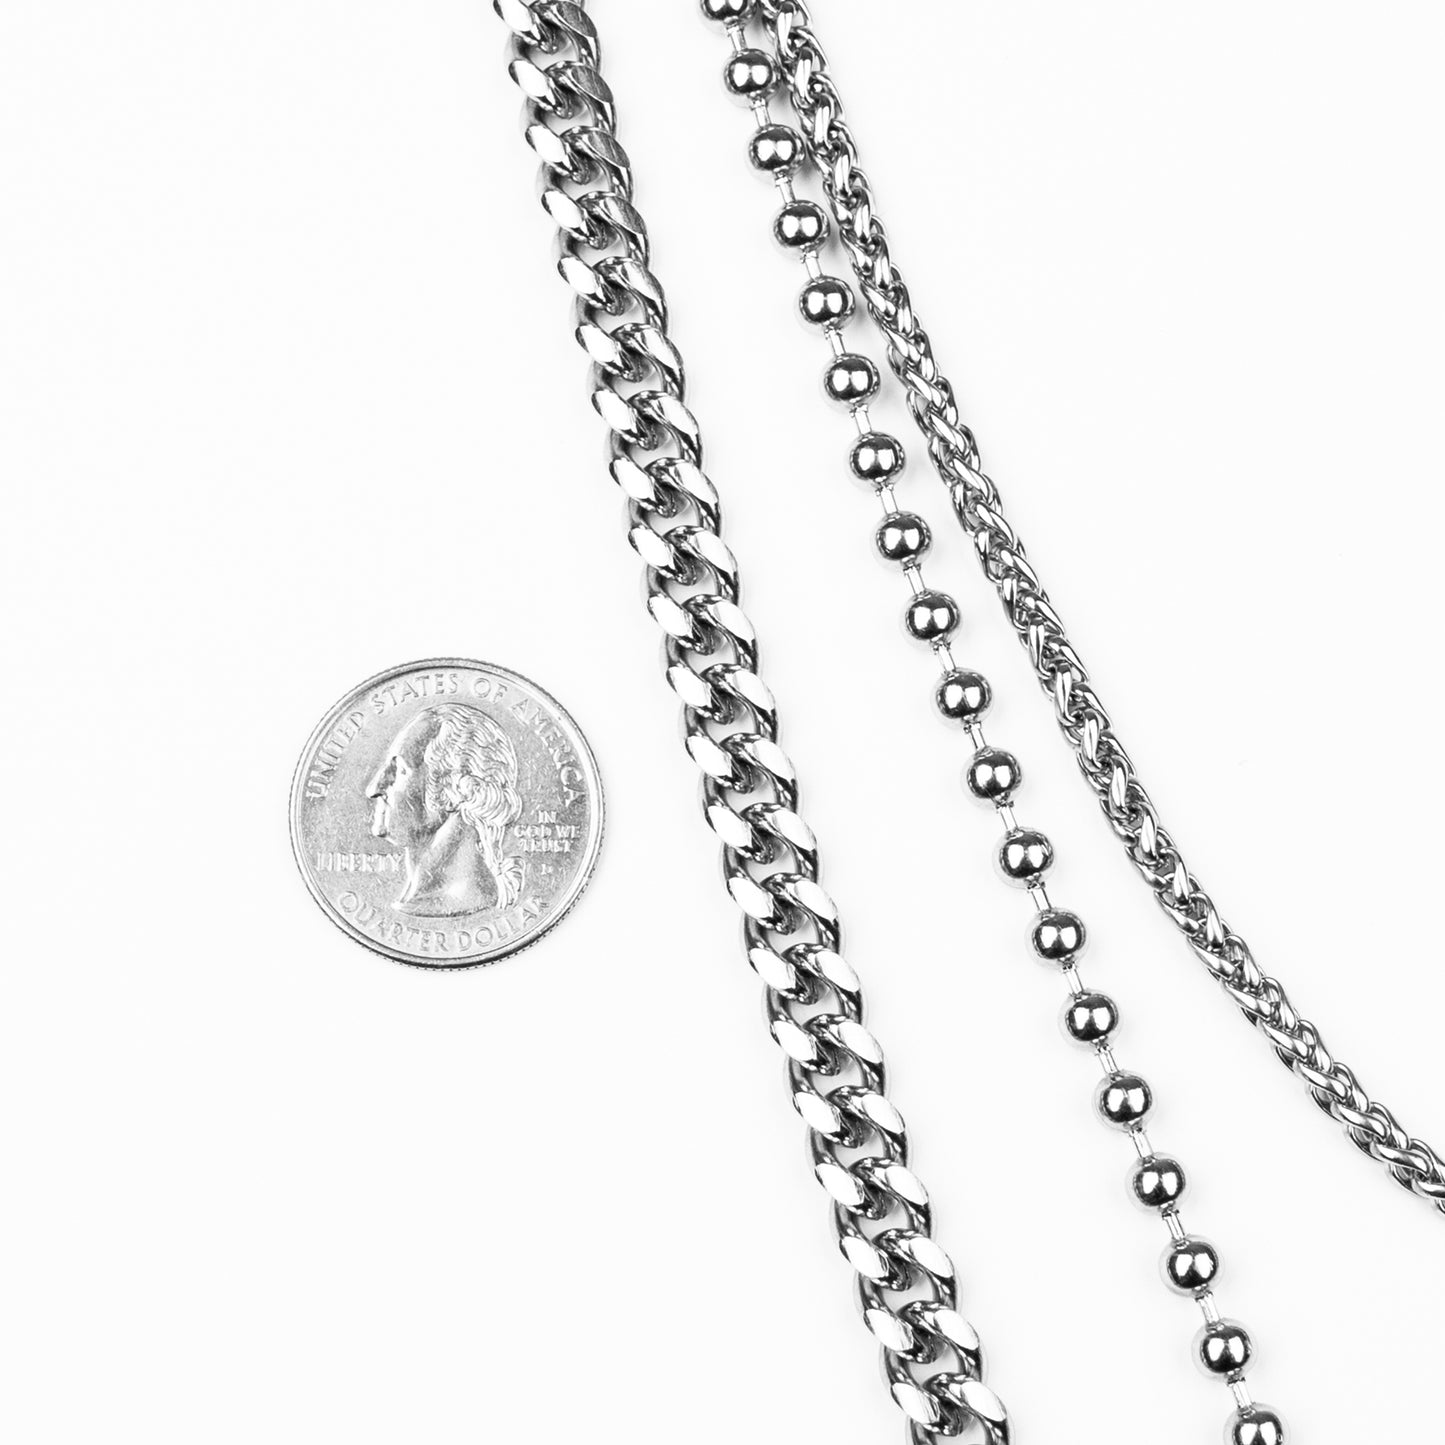 3 Link Wallet Chain